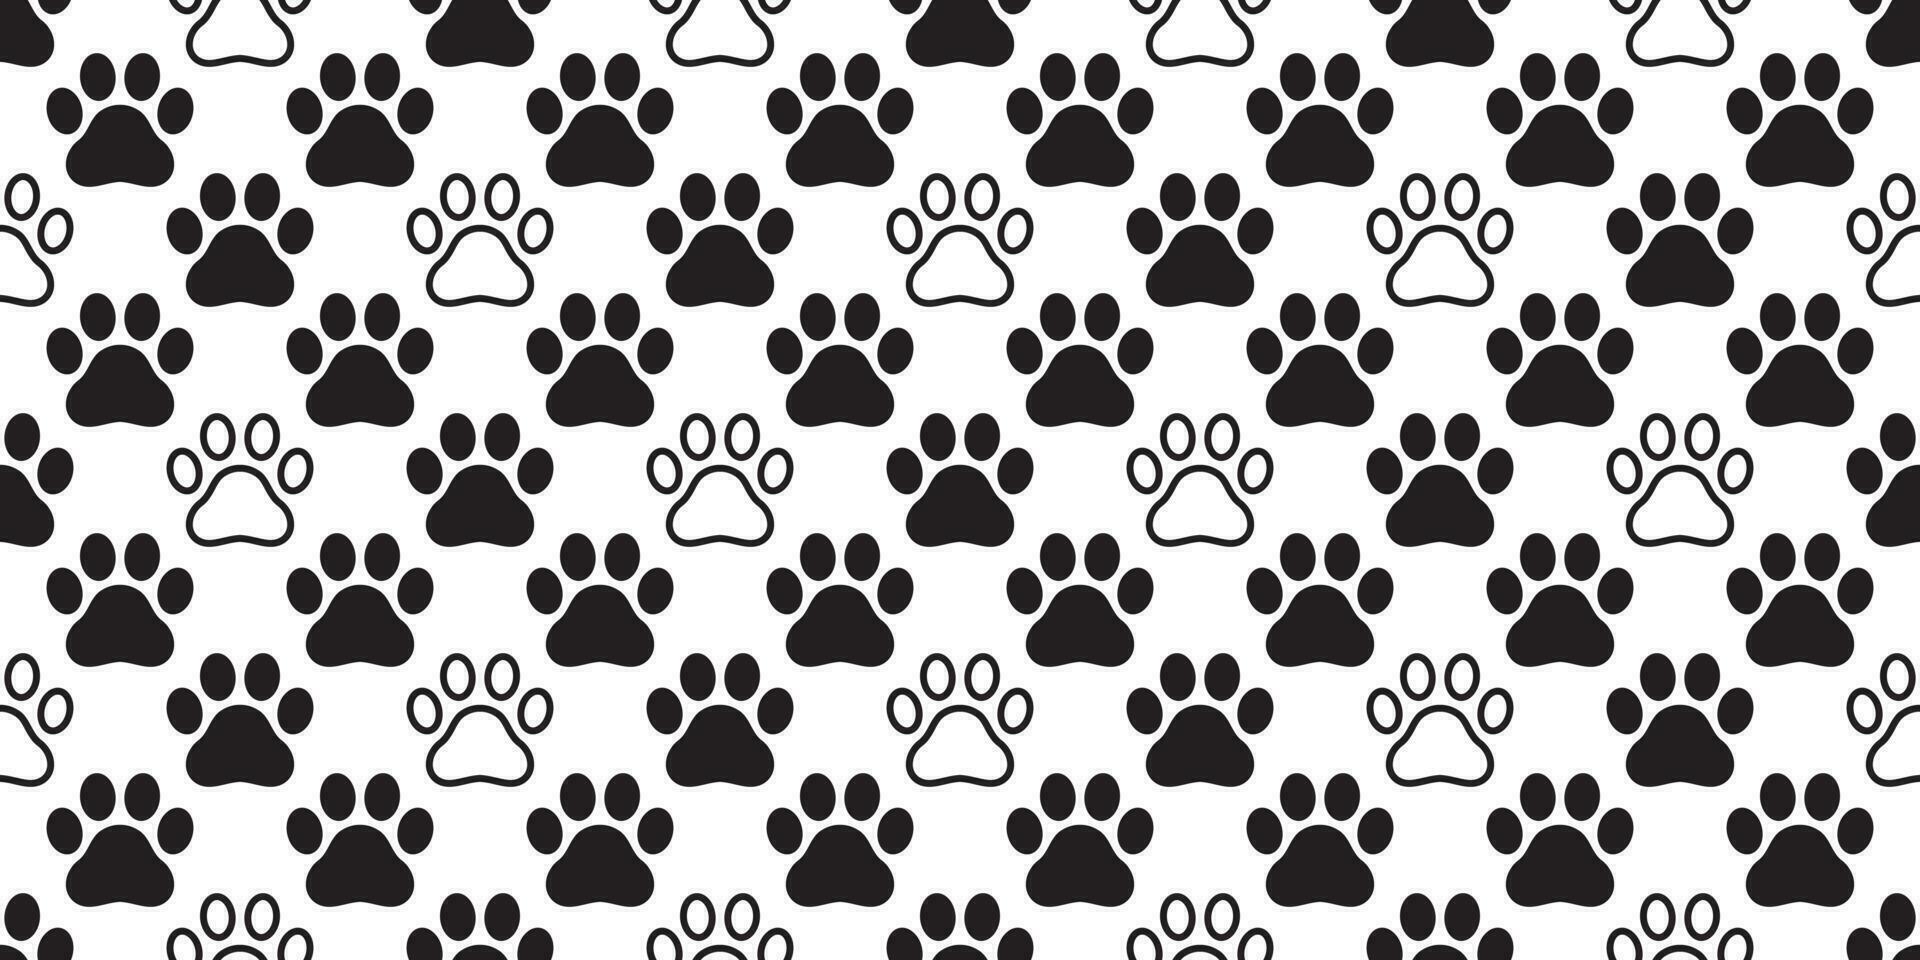 Dog Paw seamless pattern vector footprint cat kitten puppy bear scarf isolated cartoon illustration repeat wallpaper tile background